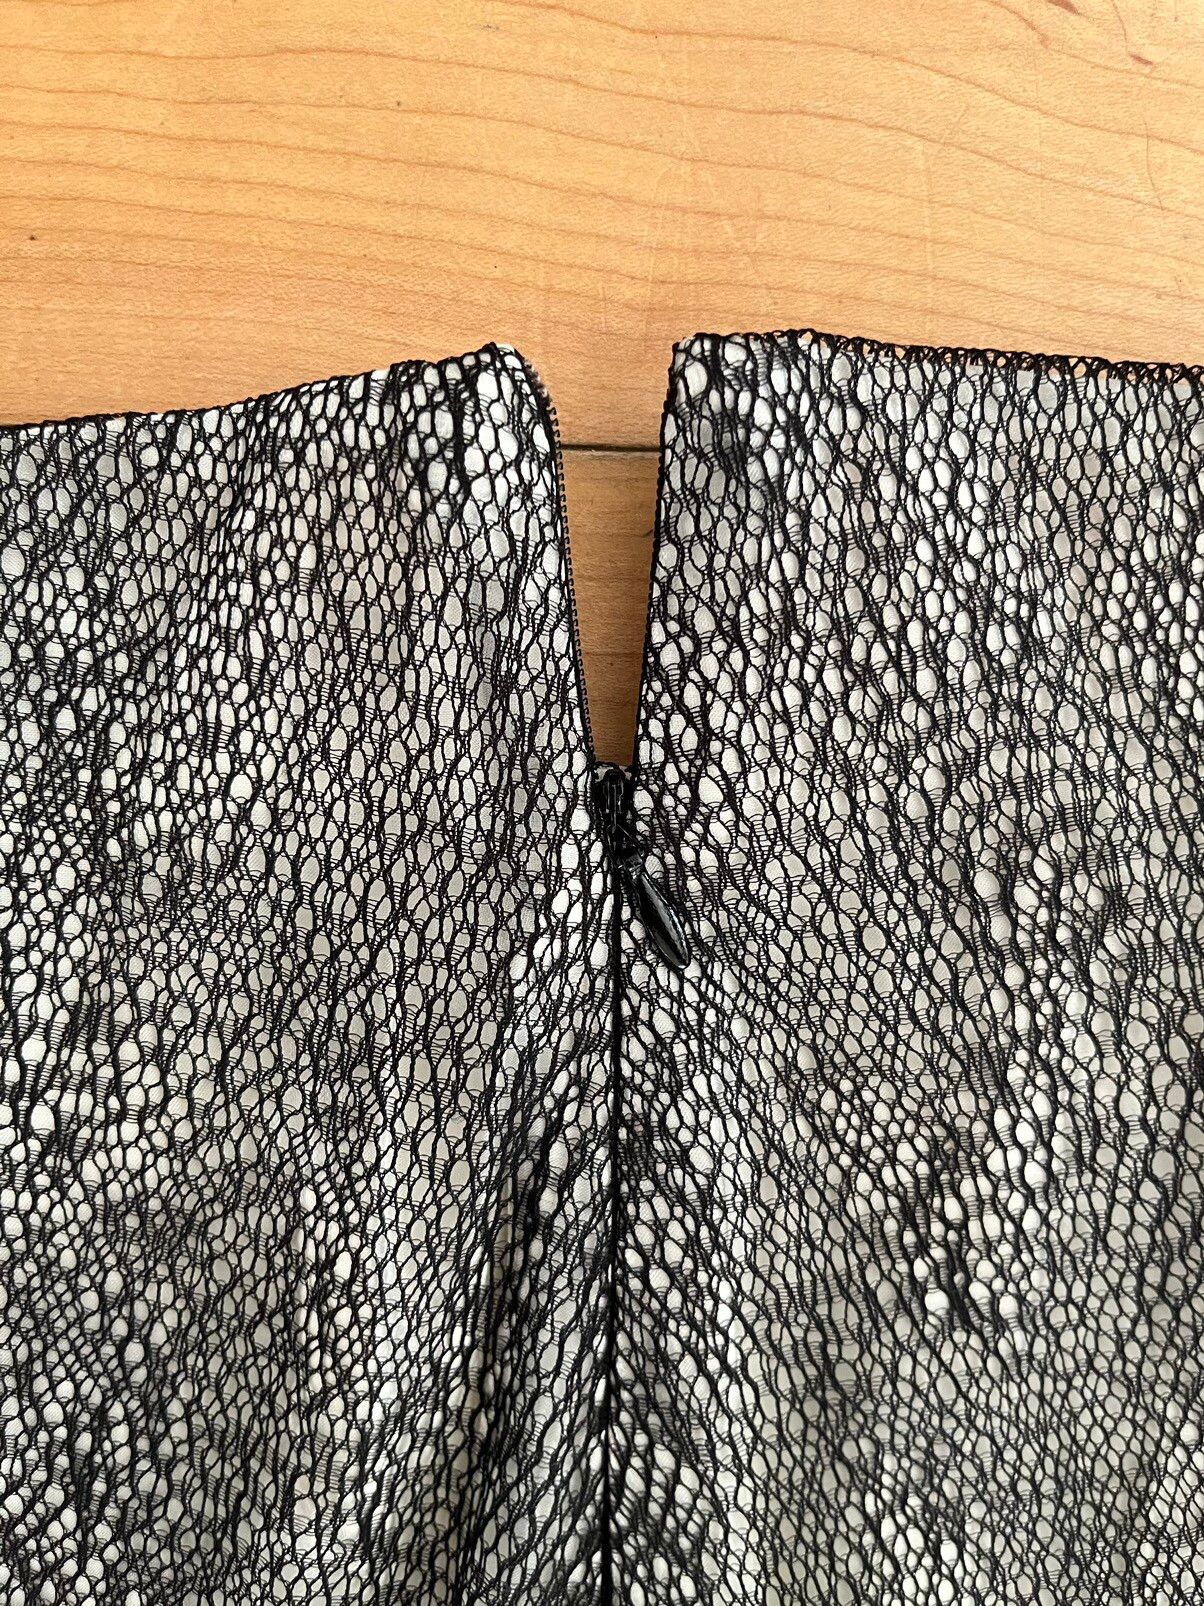 Other - NWT - Extremely Rare S/S15 Iris Van Herpen Pants - 7